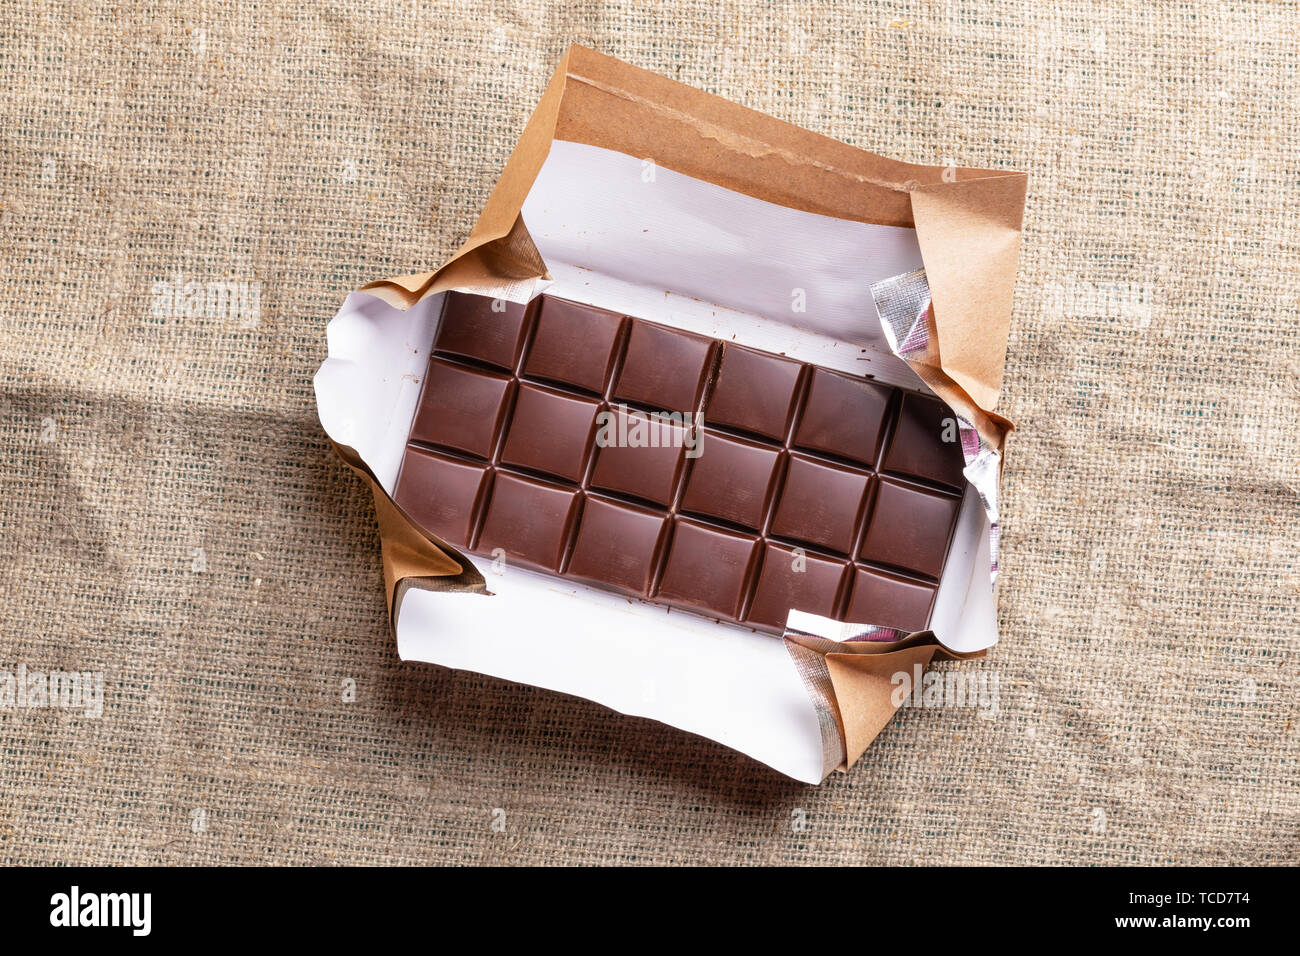 Whole chocolate bar in opened paper wrapper is lying on burlap.  Stock Photo